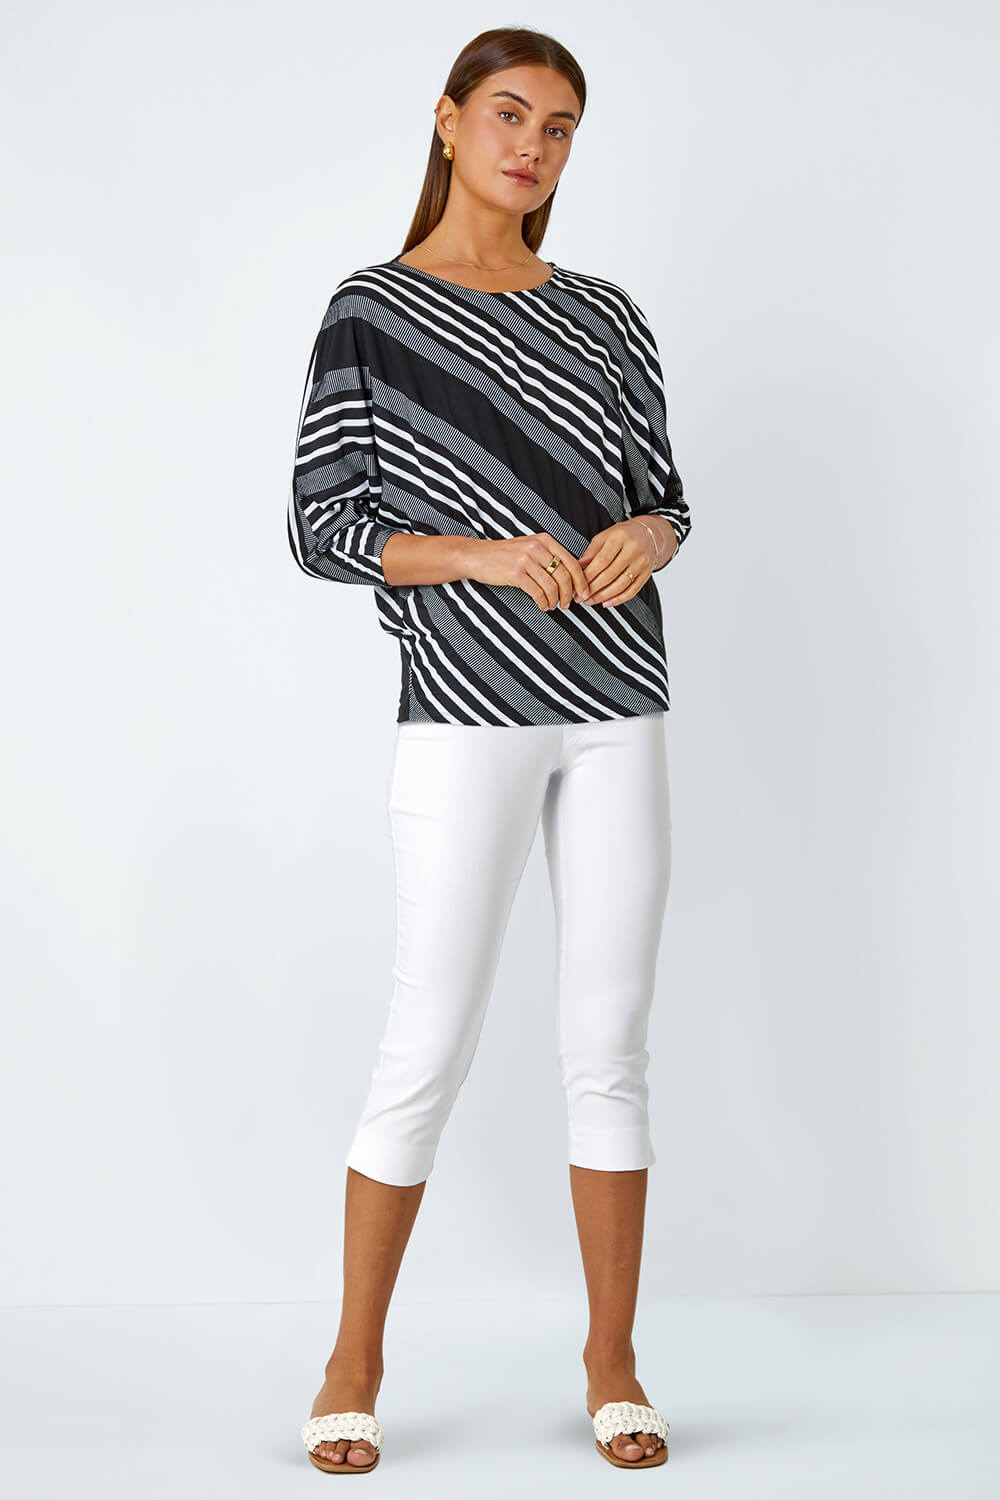 Black Relaxed Stripe Print Stretch Top, Image 2 of 5